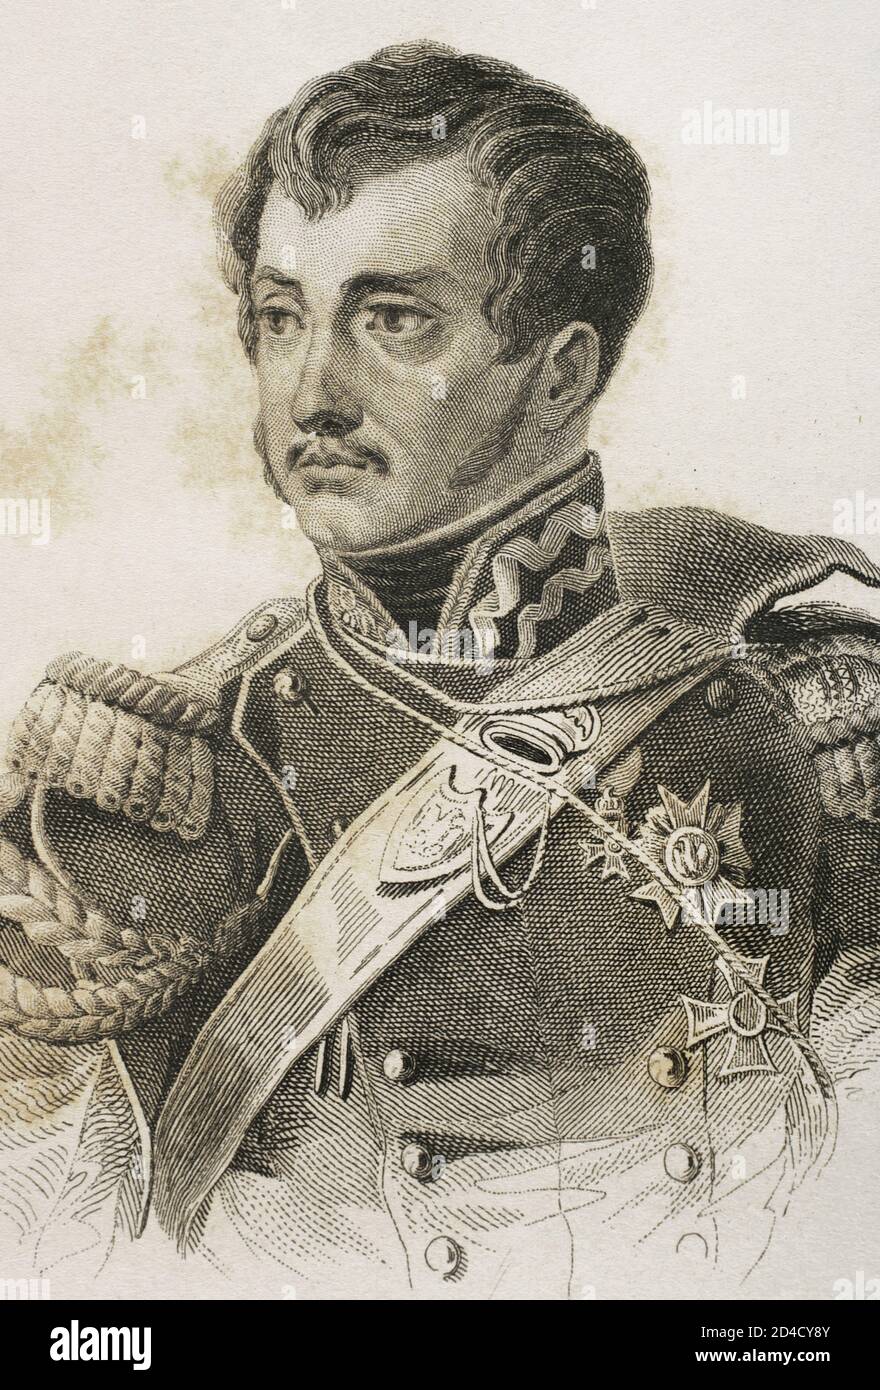 Jozef Antoni Poniatowski (1763-1813). Polish leaderl, minister of war and military hero, who became a marshal of France. Portrait. Engraving by Lemaitre, Vernier and Goulu. History of Poland, by Charles Foster. Panorama Universal, 1840. Stock Photo